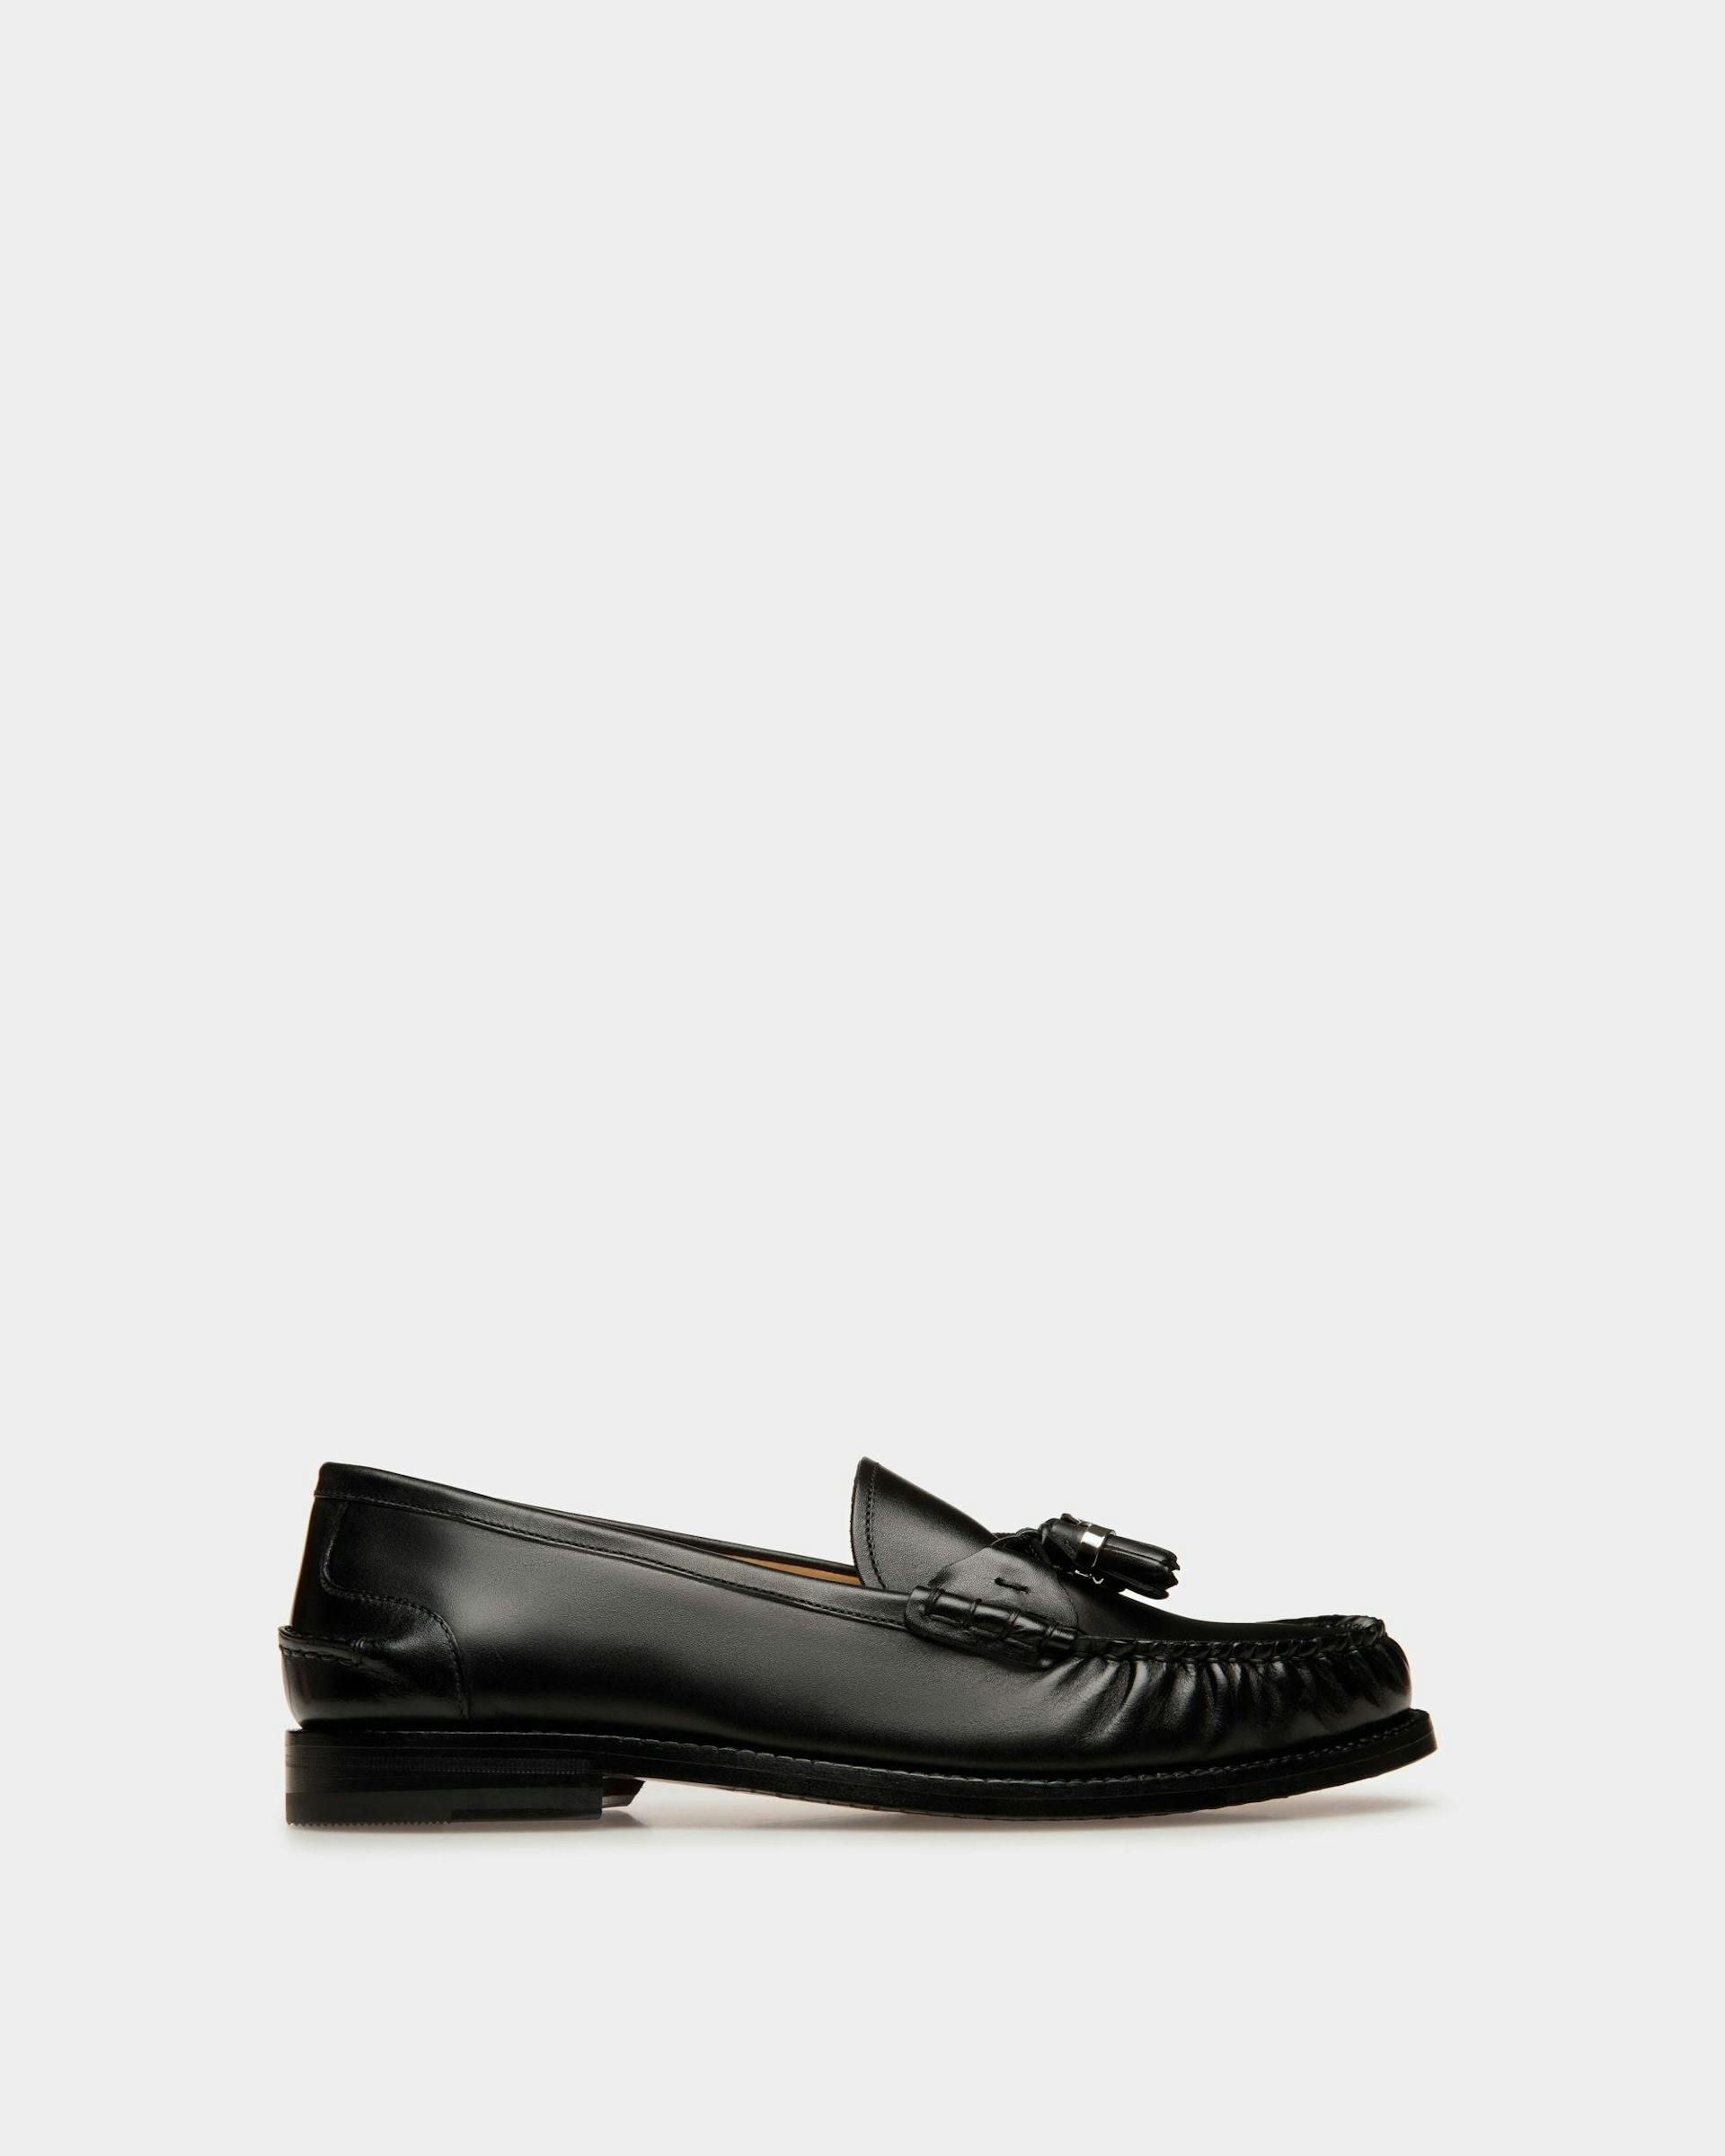 Rome Moccasins In Black Leather - Women's - Bally - 01